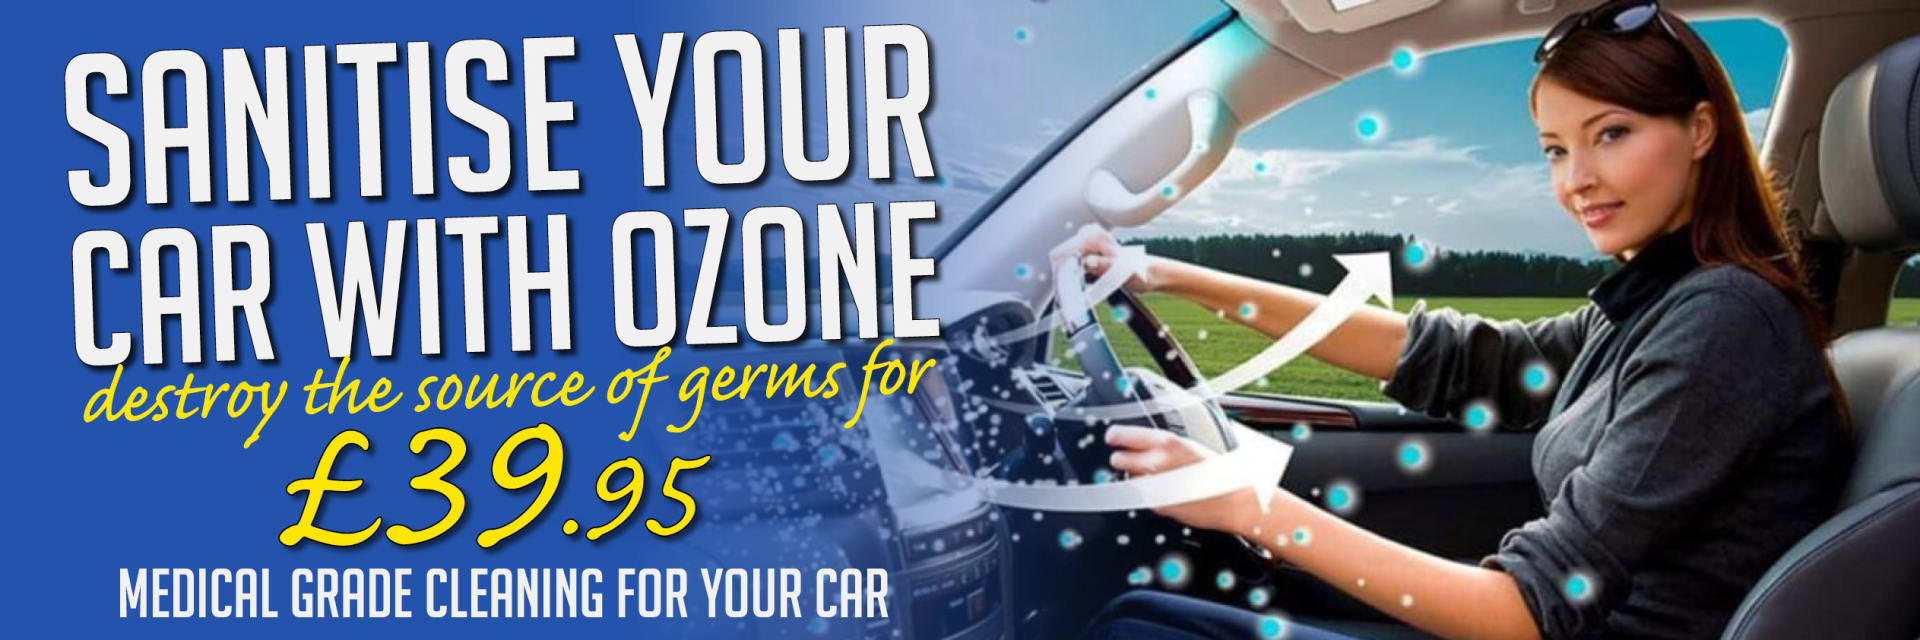 sanitise your car with ozone 